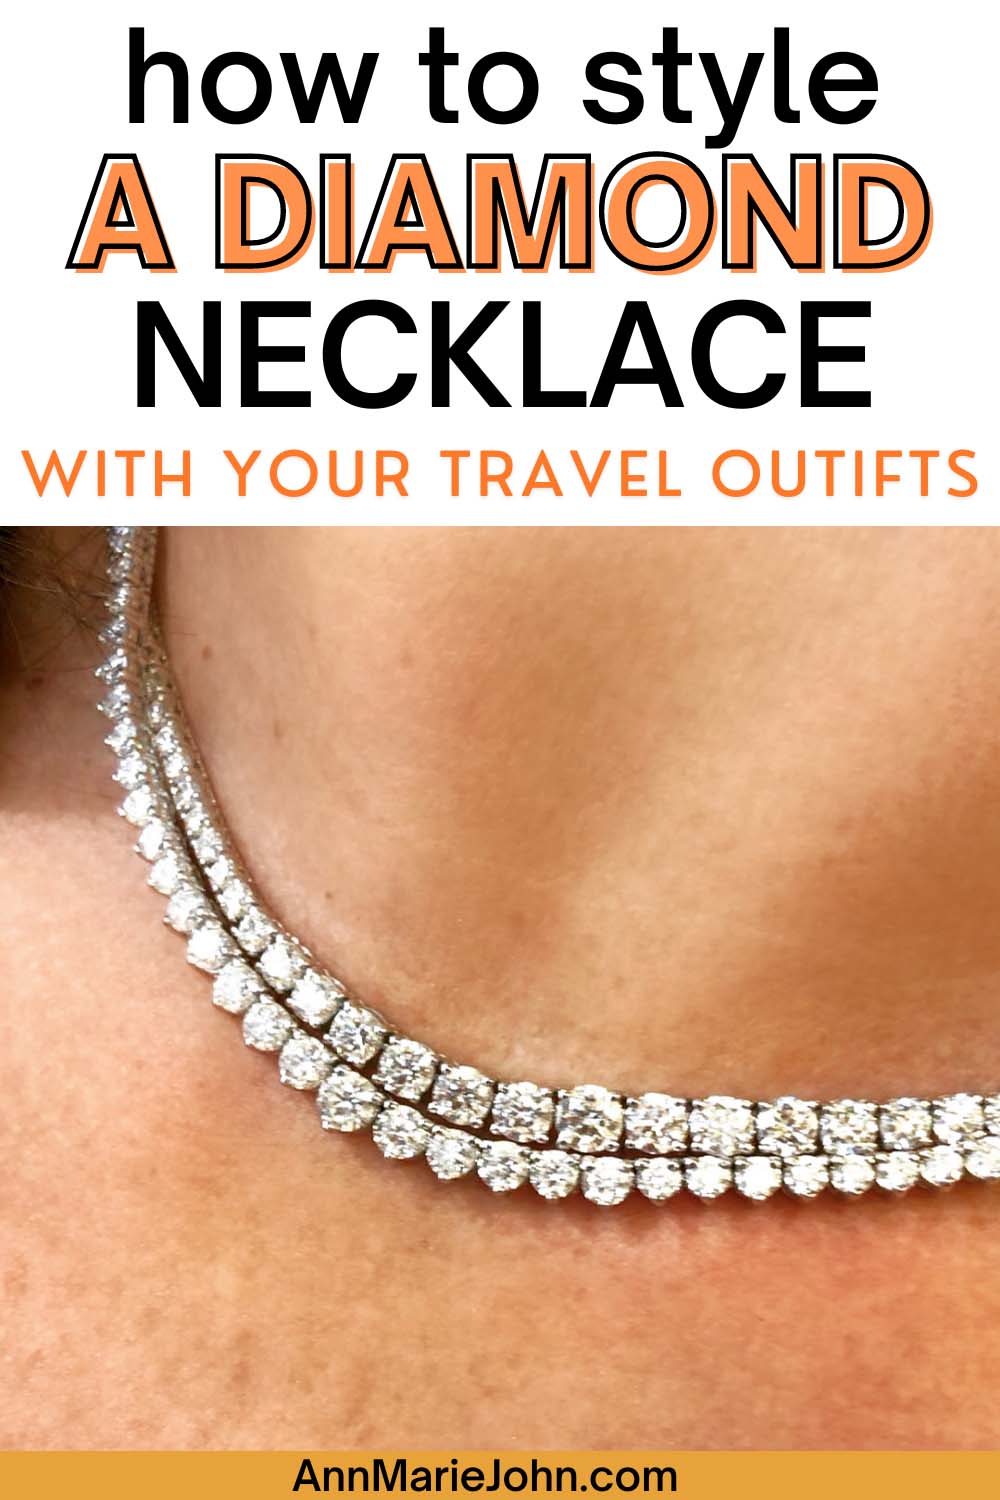 How to Style Diamond Necklaces With Your Travel Outfits